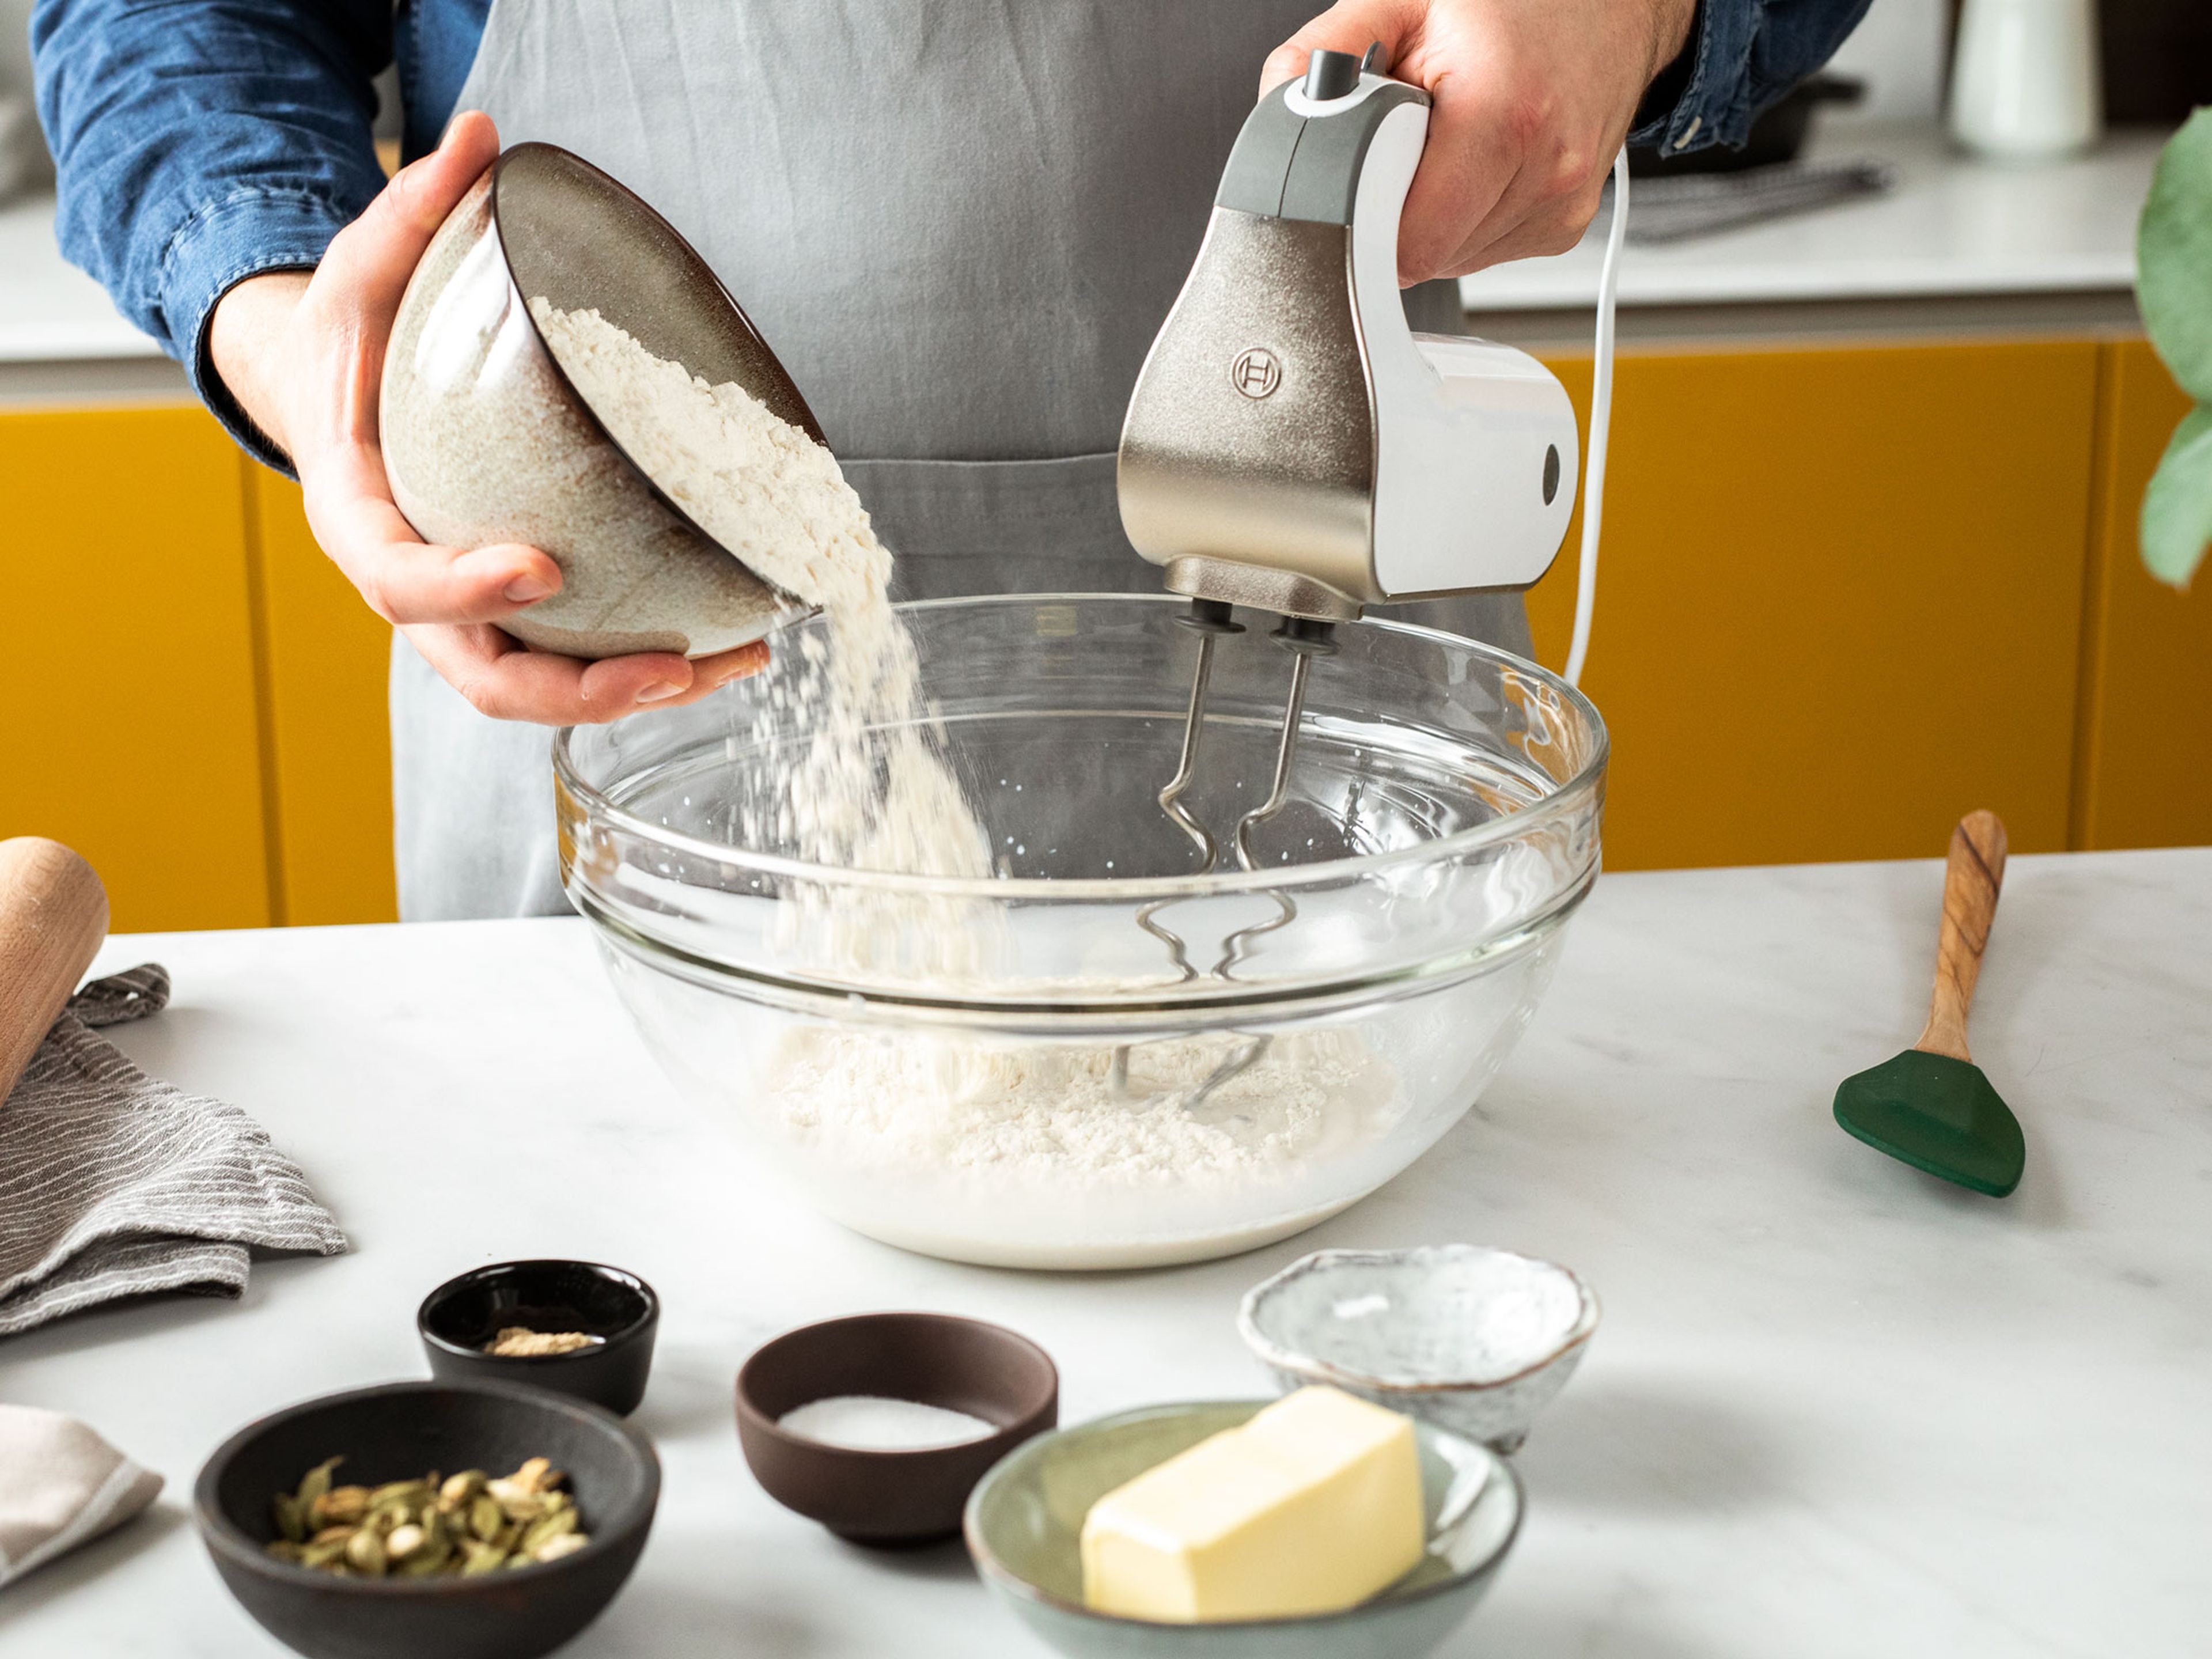 Whisk together the fresh yeast and lukewarm milk in a bowl. Add the flour, sugar, salt, some of the butter, and some of the ground cardamom and beat together using a hand mixer fitted with dough hooks. Cover with a clean kitchen towel and let rest for approx. 30 min.